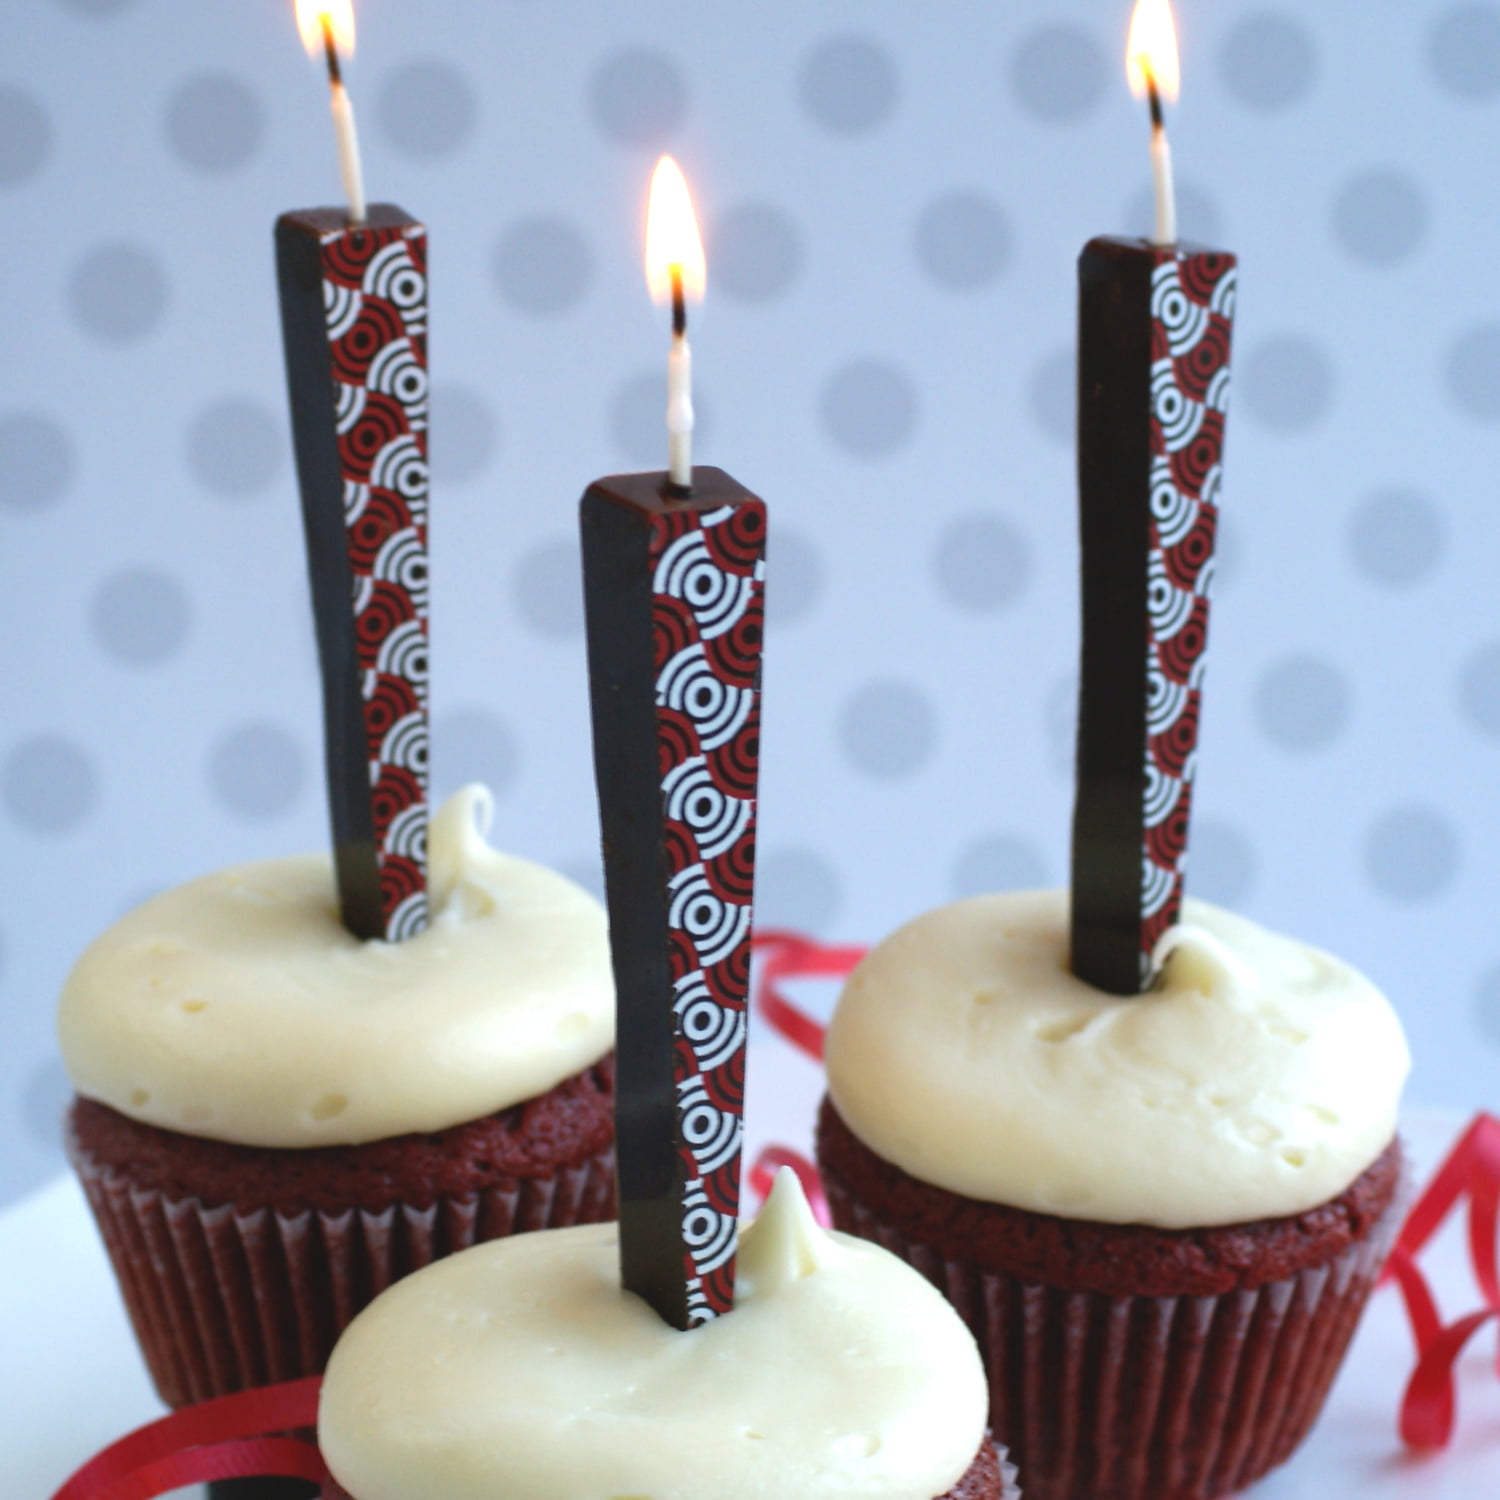 Edible Dark Chocolate Candles, Targets, 3ct - Let Them Eat Candles